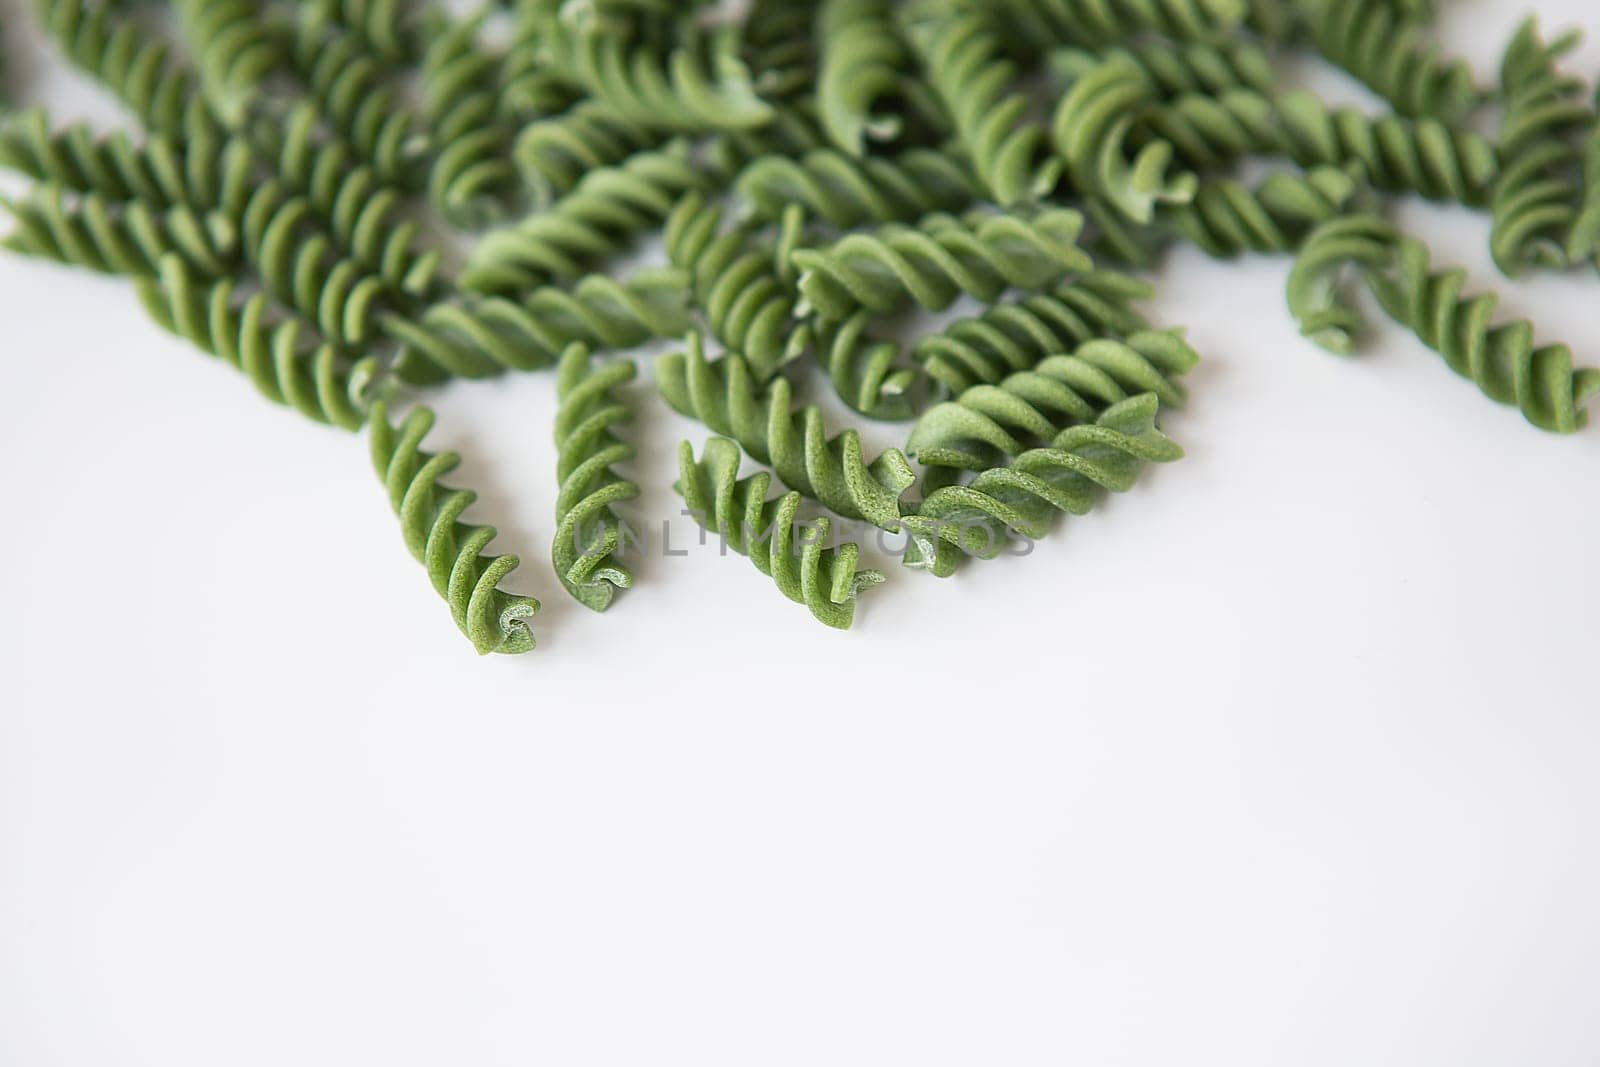 Raw green fusilli pasta, natural based on spinach and spirulina. Delicious and healthy food. by sfinks